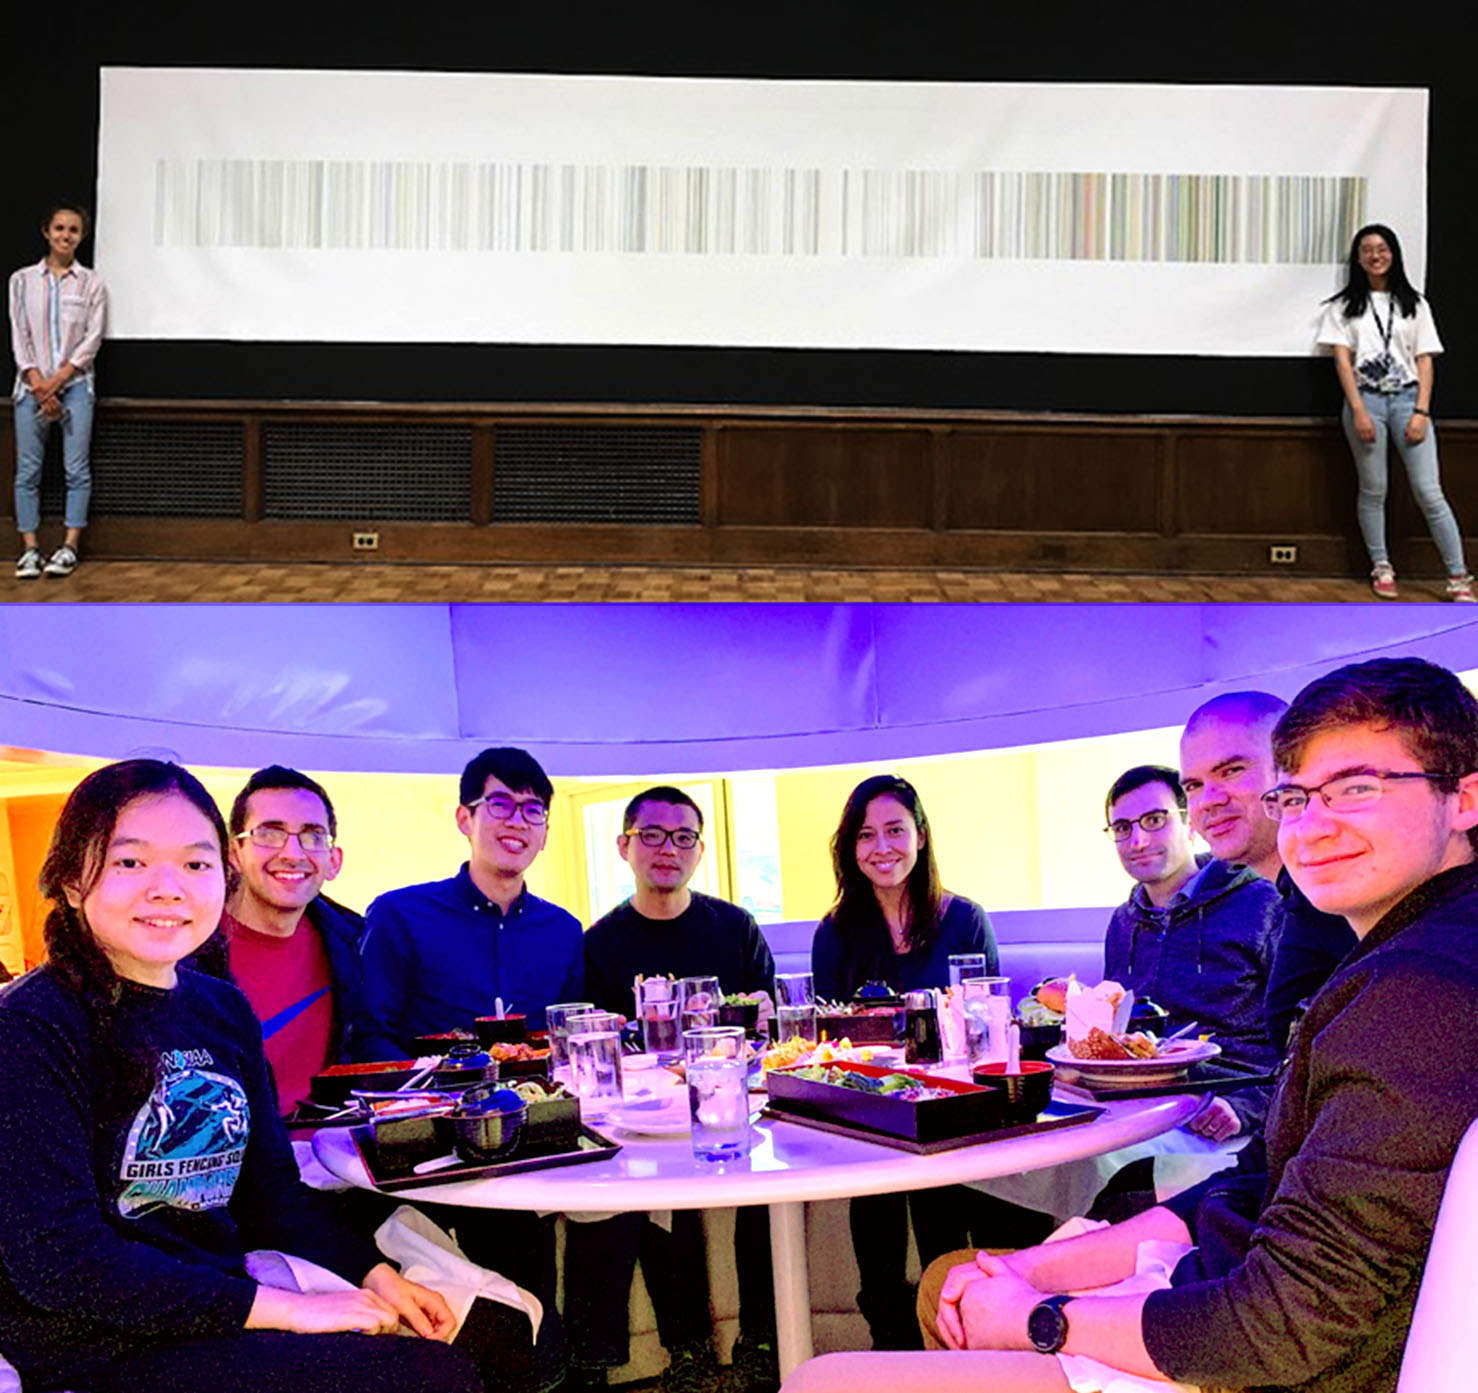 Upper Photo: Hammer lab summer high school students Amélie Lemay (left) and Allison Zhang (right). Lower Photo: Good lab summer high school students Michelle Tong (far left) and Jake Becker (far right)